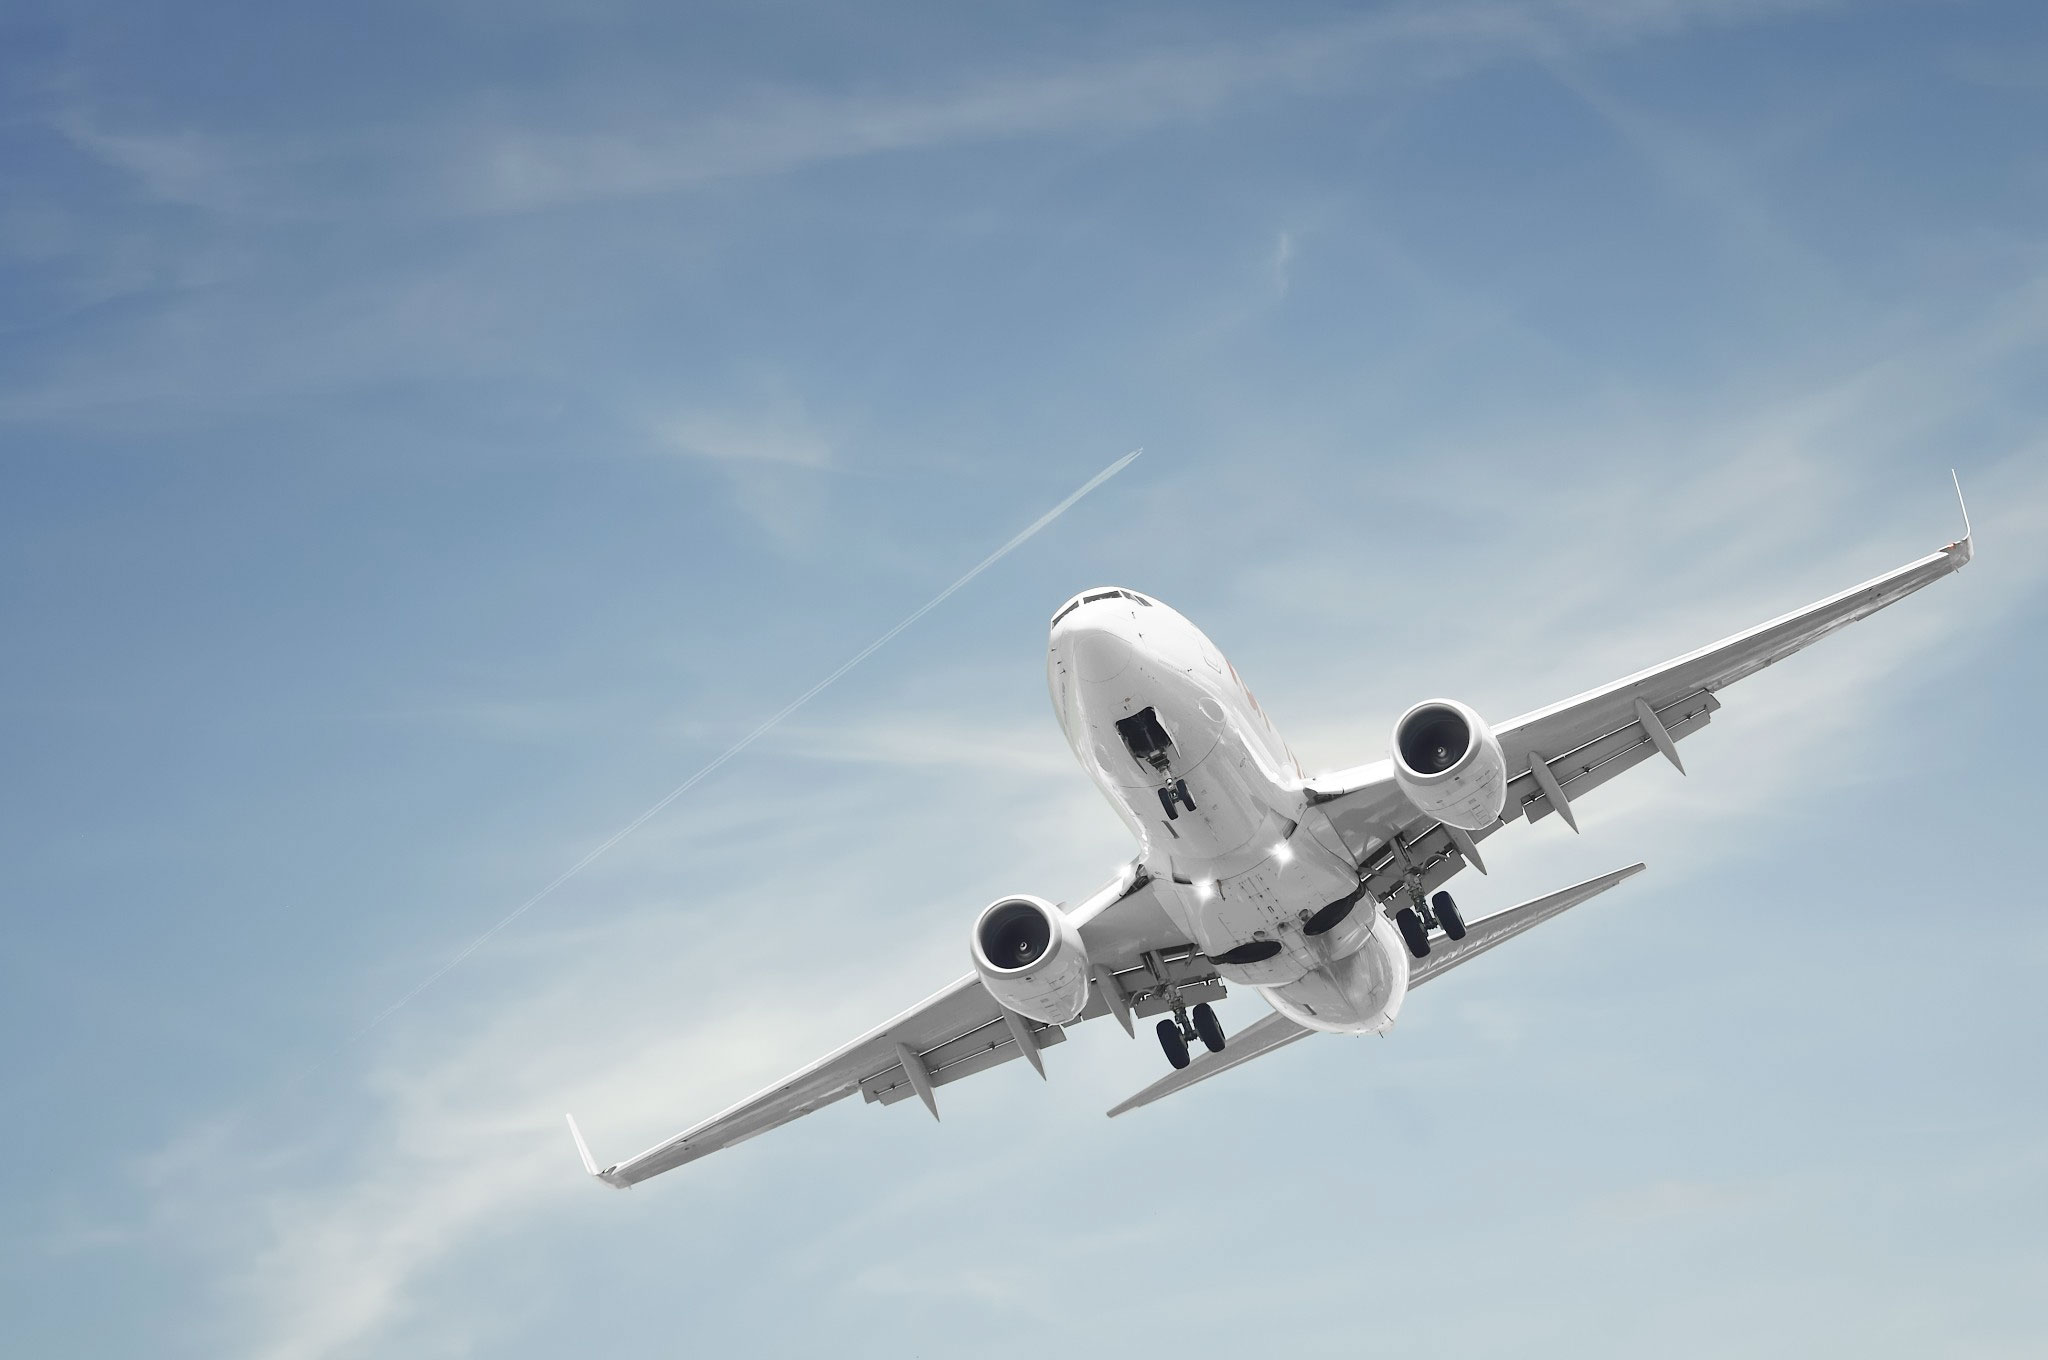 OVER 40 YEARS OF EXPERIENCE IN AIR FREIGHT FORWARDING